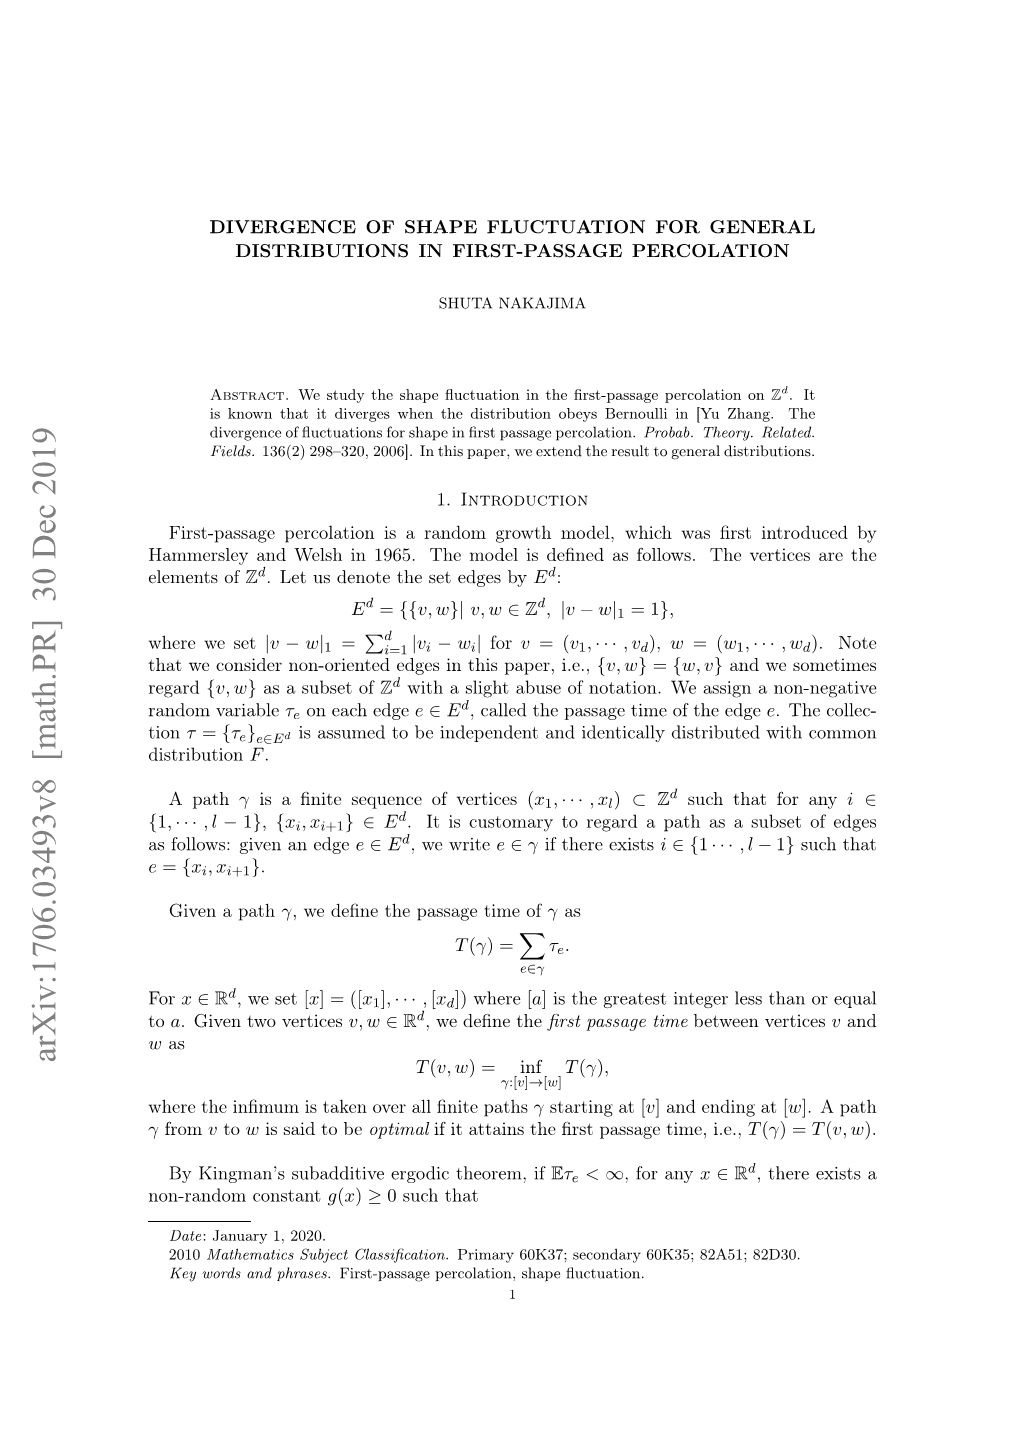 Divergence of Shape Fluctuation for General Distributions in First-Passage Percolation